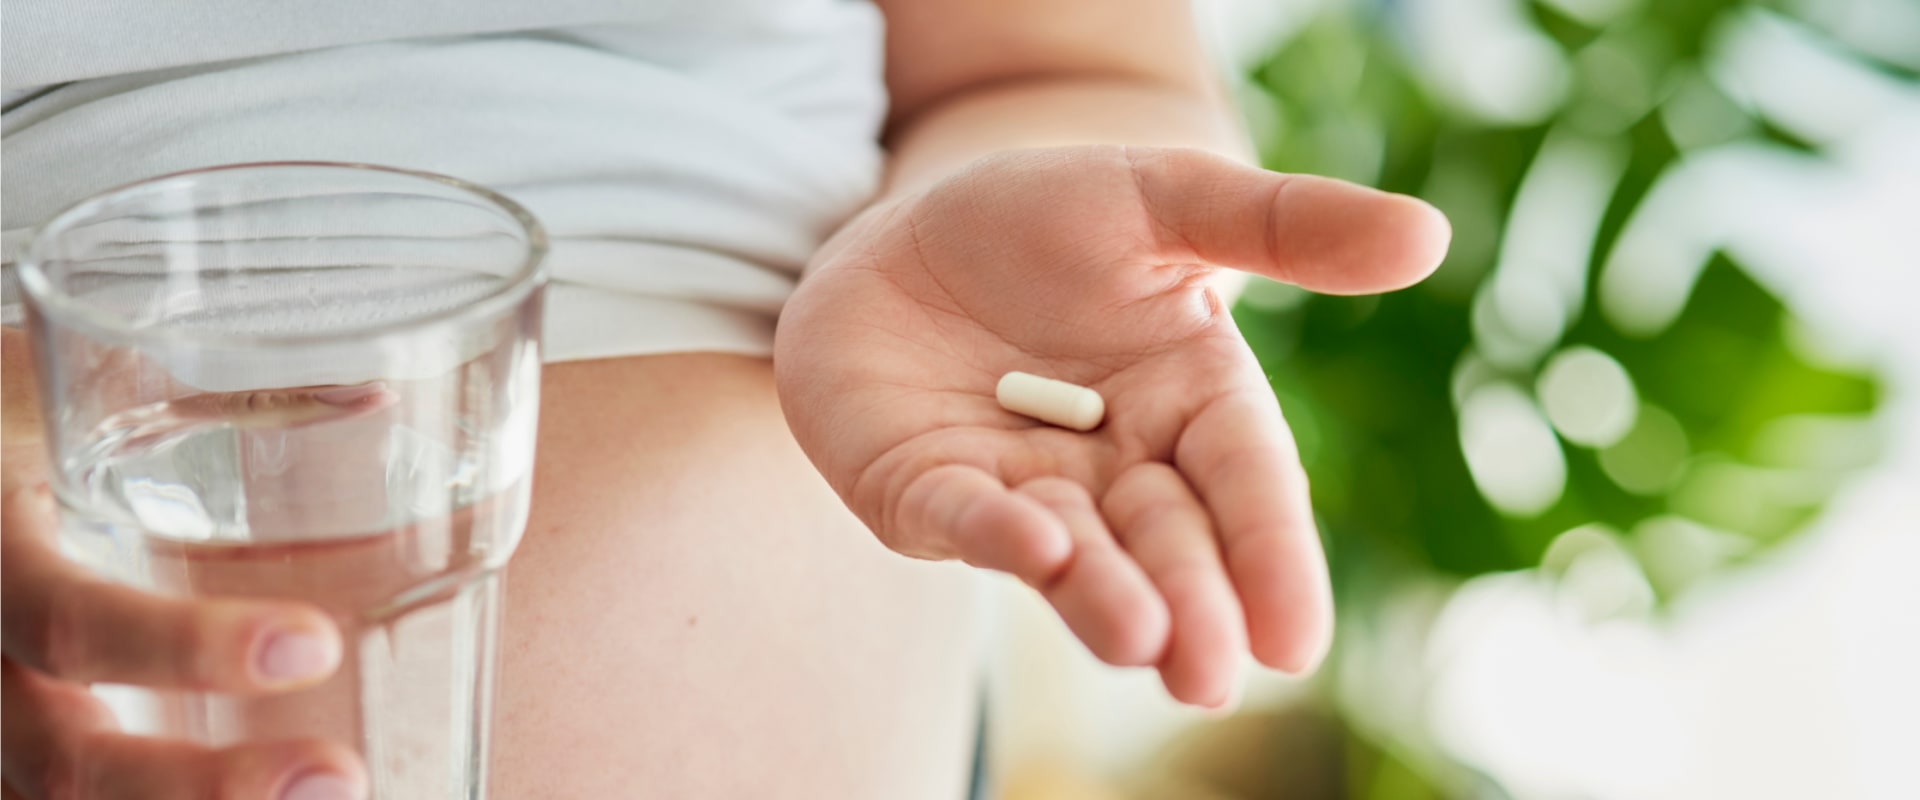 Vitamins and Supplements for Pregnant Women: What to Consider